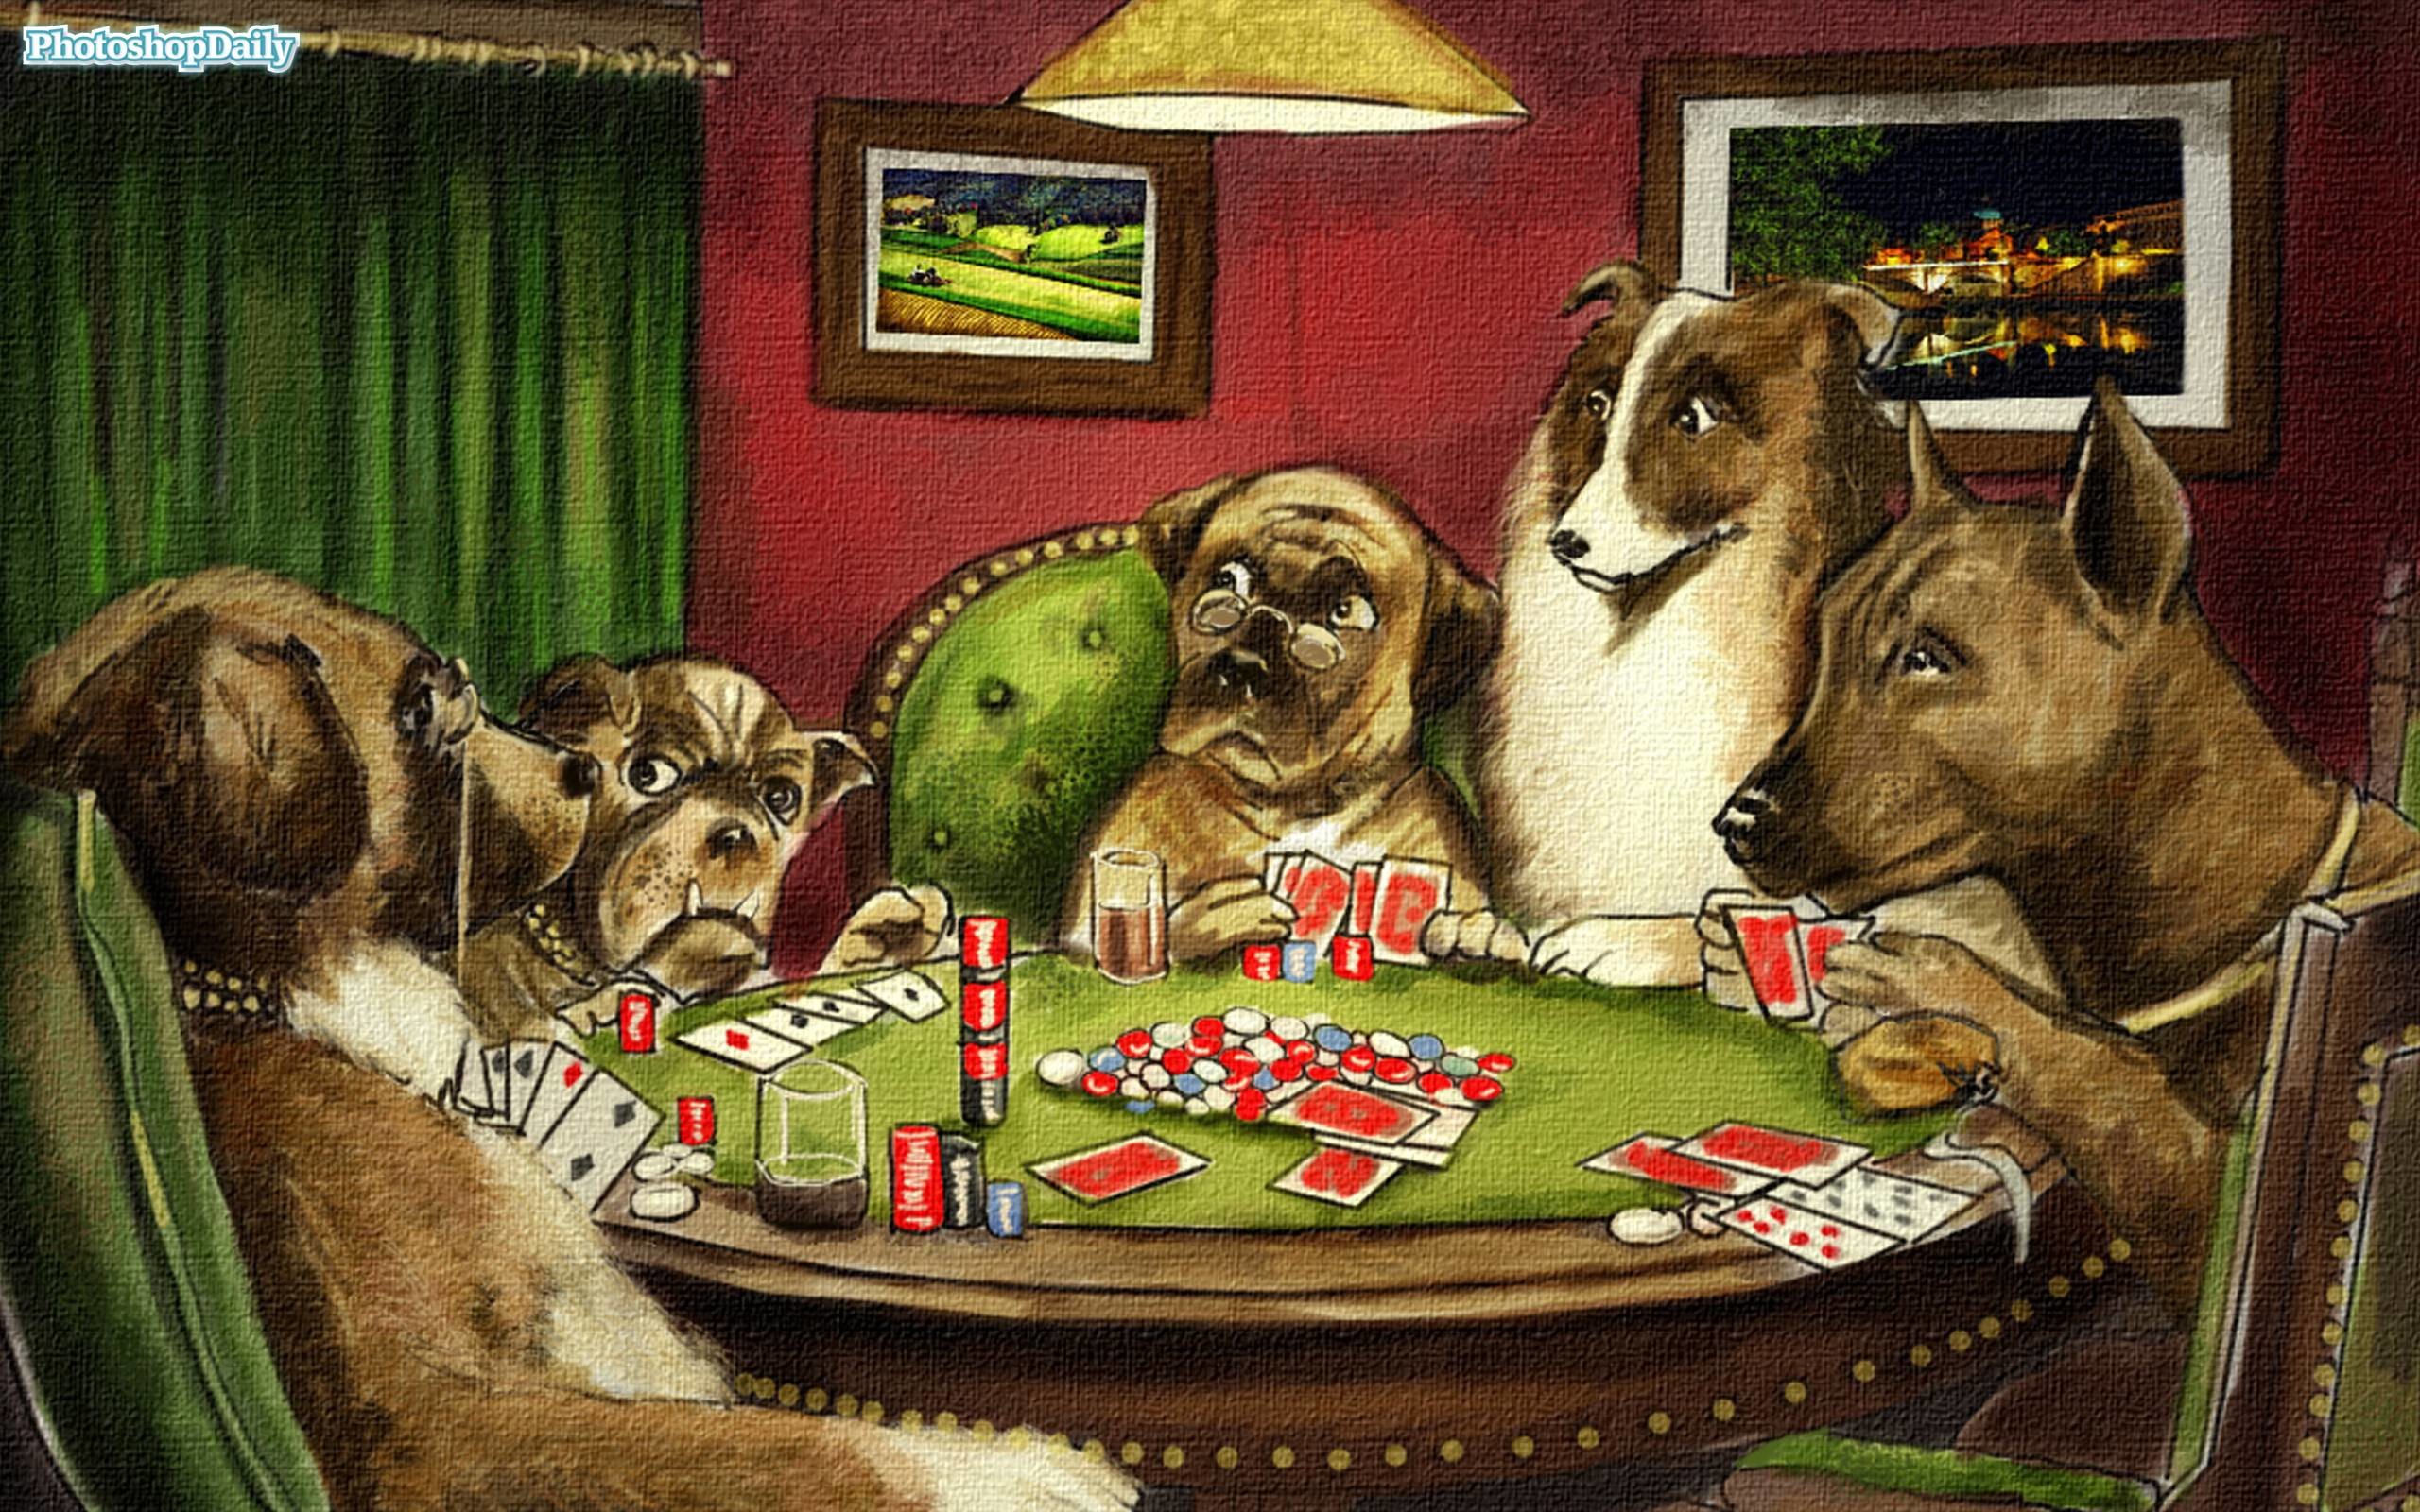 2560x1600 Poker dogs desktop | Photoshop Daily - Free Resource For The .